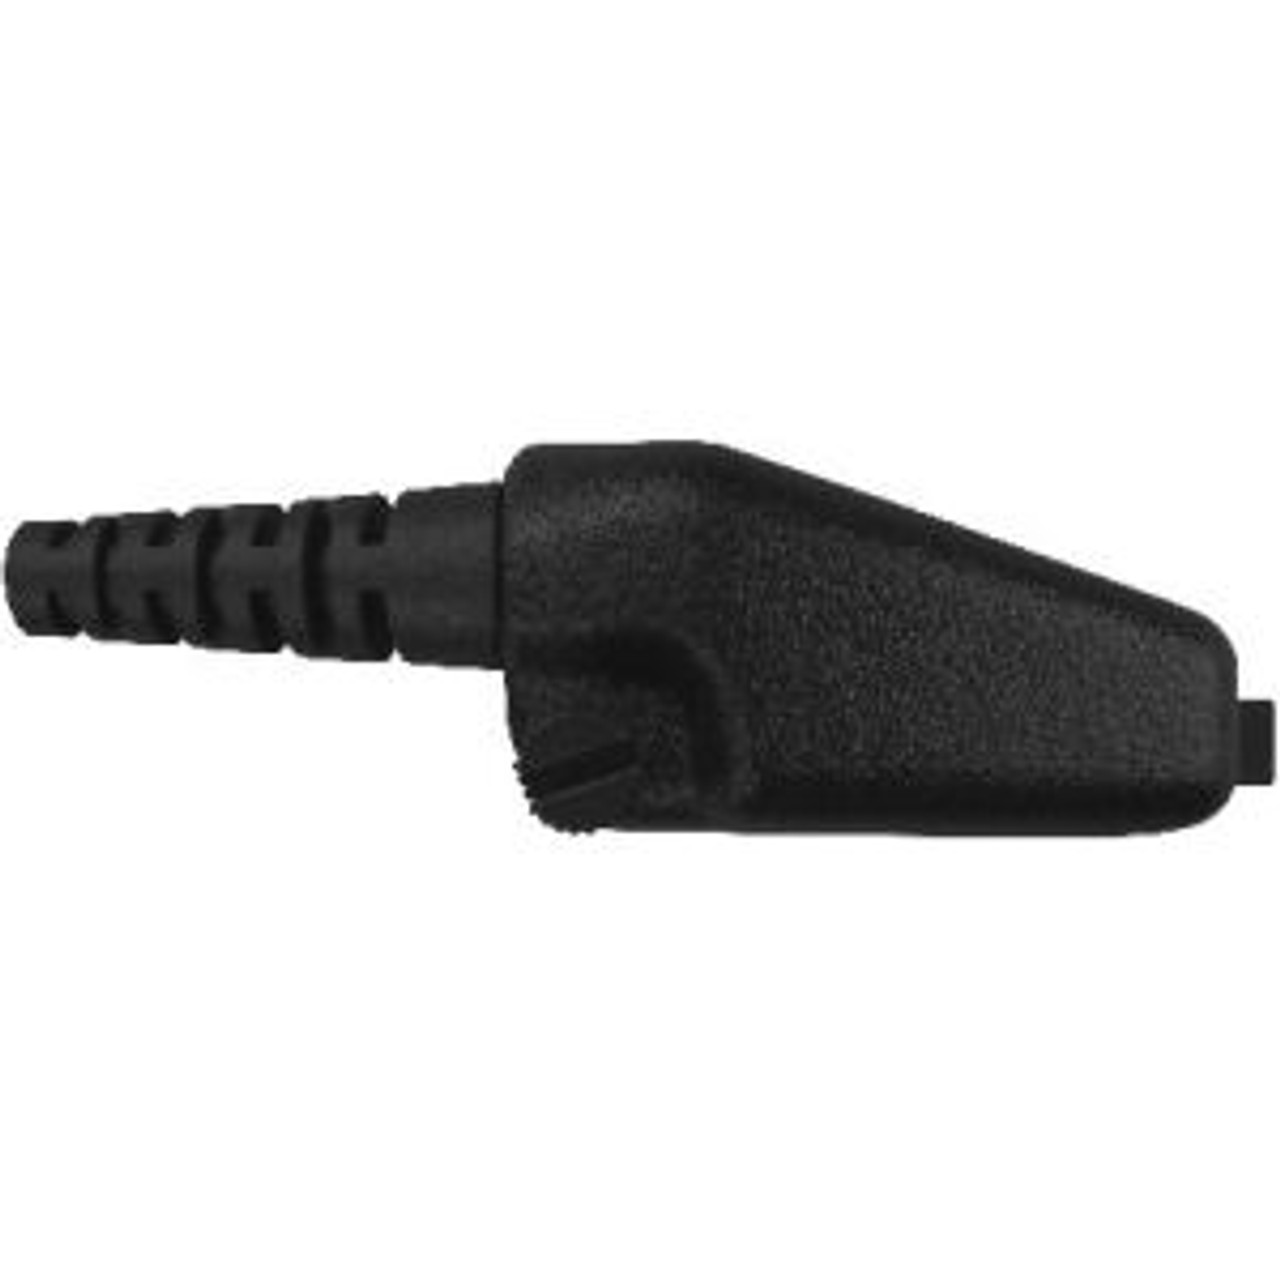 Otto ClearTrak NRX Behind The Head Double Muff Headset For Kenwood TK-3140